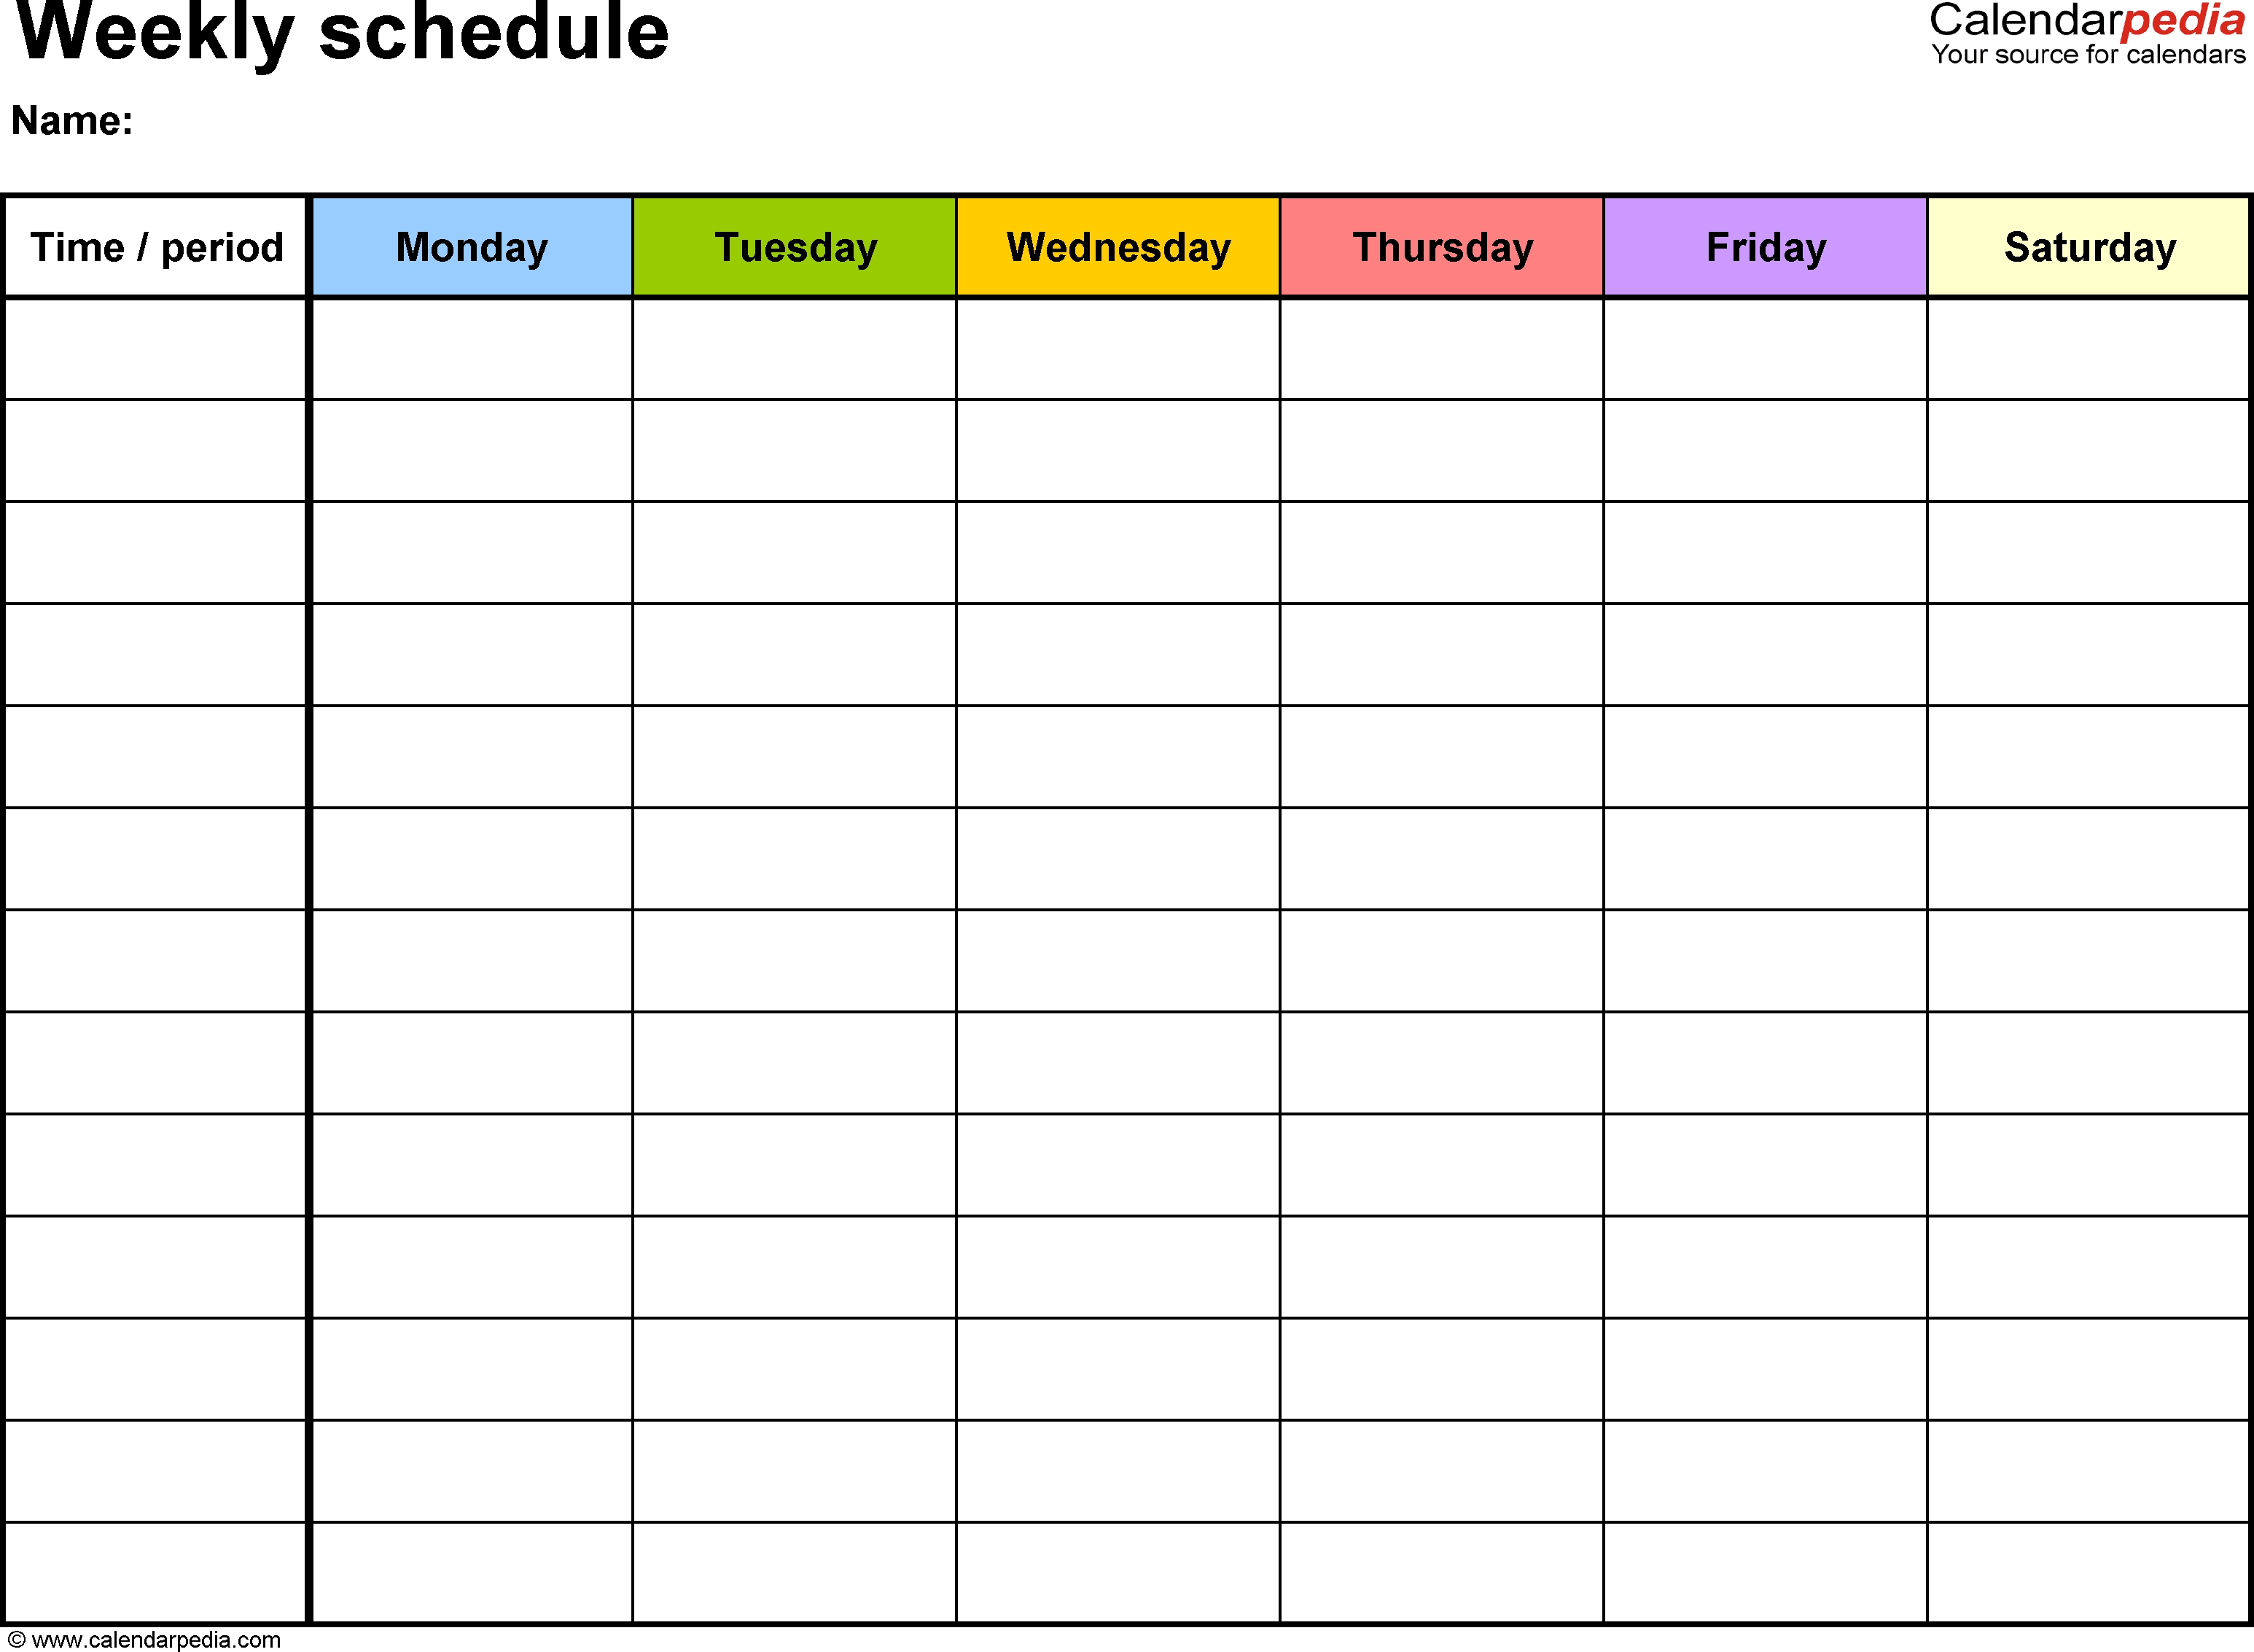 Free Weekly Schedule Templates For Word - 18 Templates-Calendar 2020 Template For Summer Camp Schedule